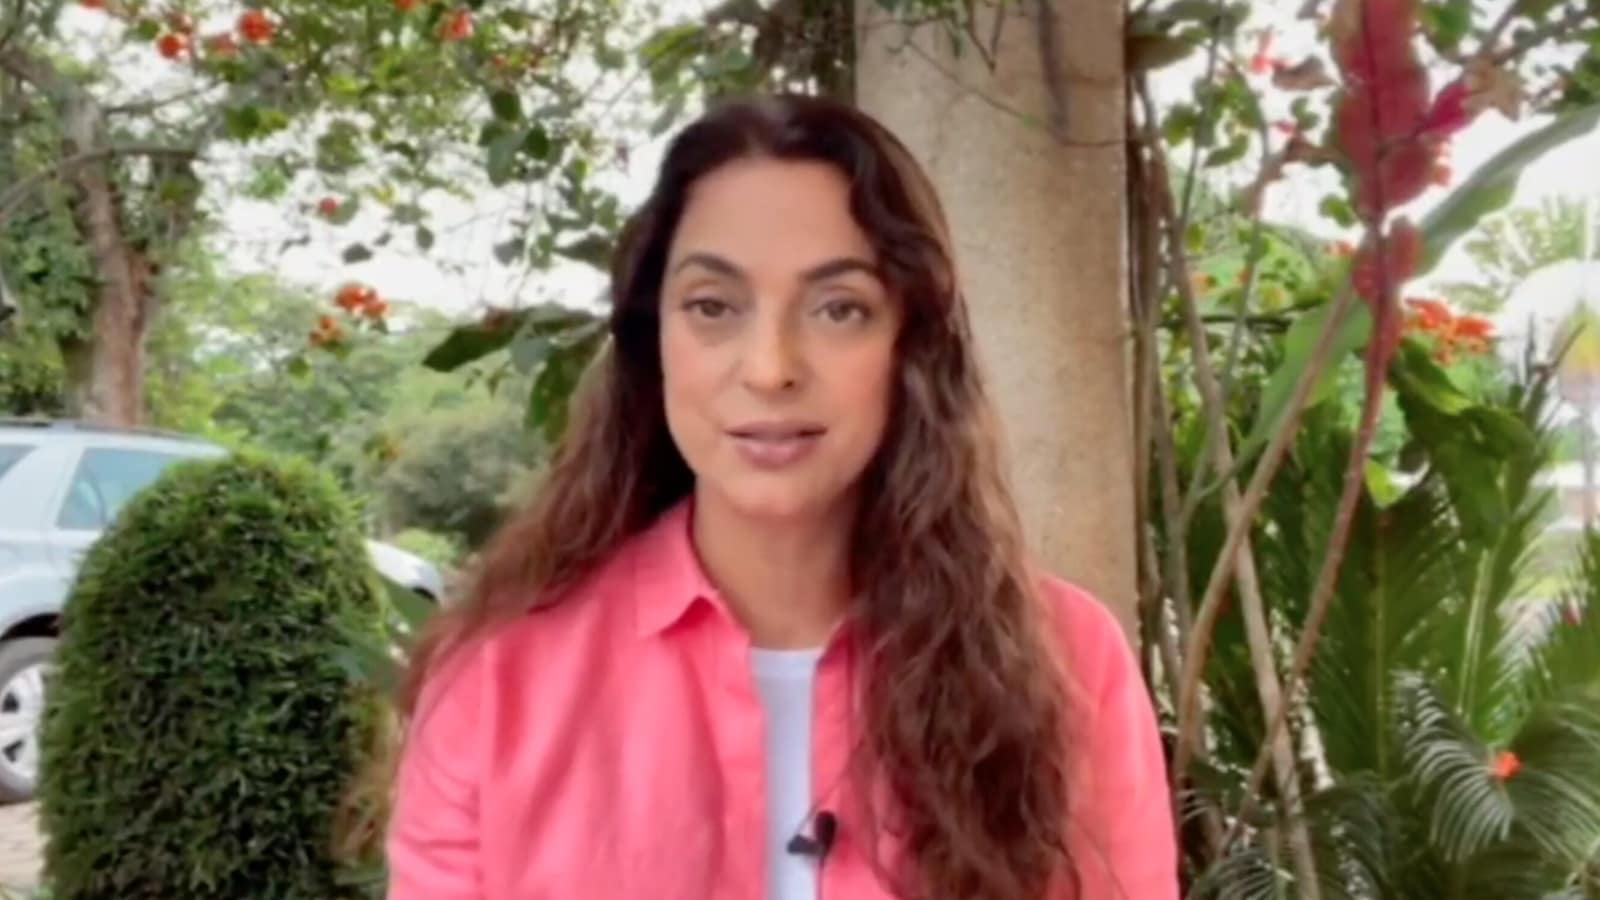 Hindi Movies Juhi Chawla X Video - Juhi Chawla breaks silence, shares video on fight against 5G tech: 'I'll  let you decide if it was publicity stunt' | Bollywood - Hindustan Times